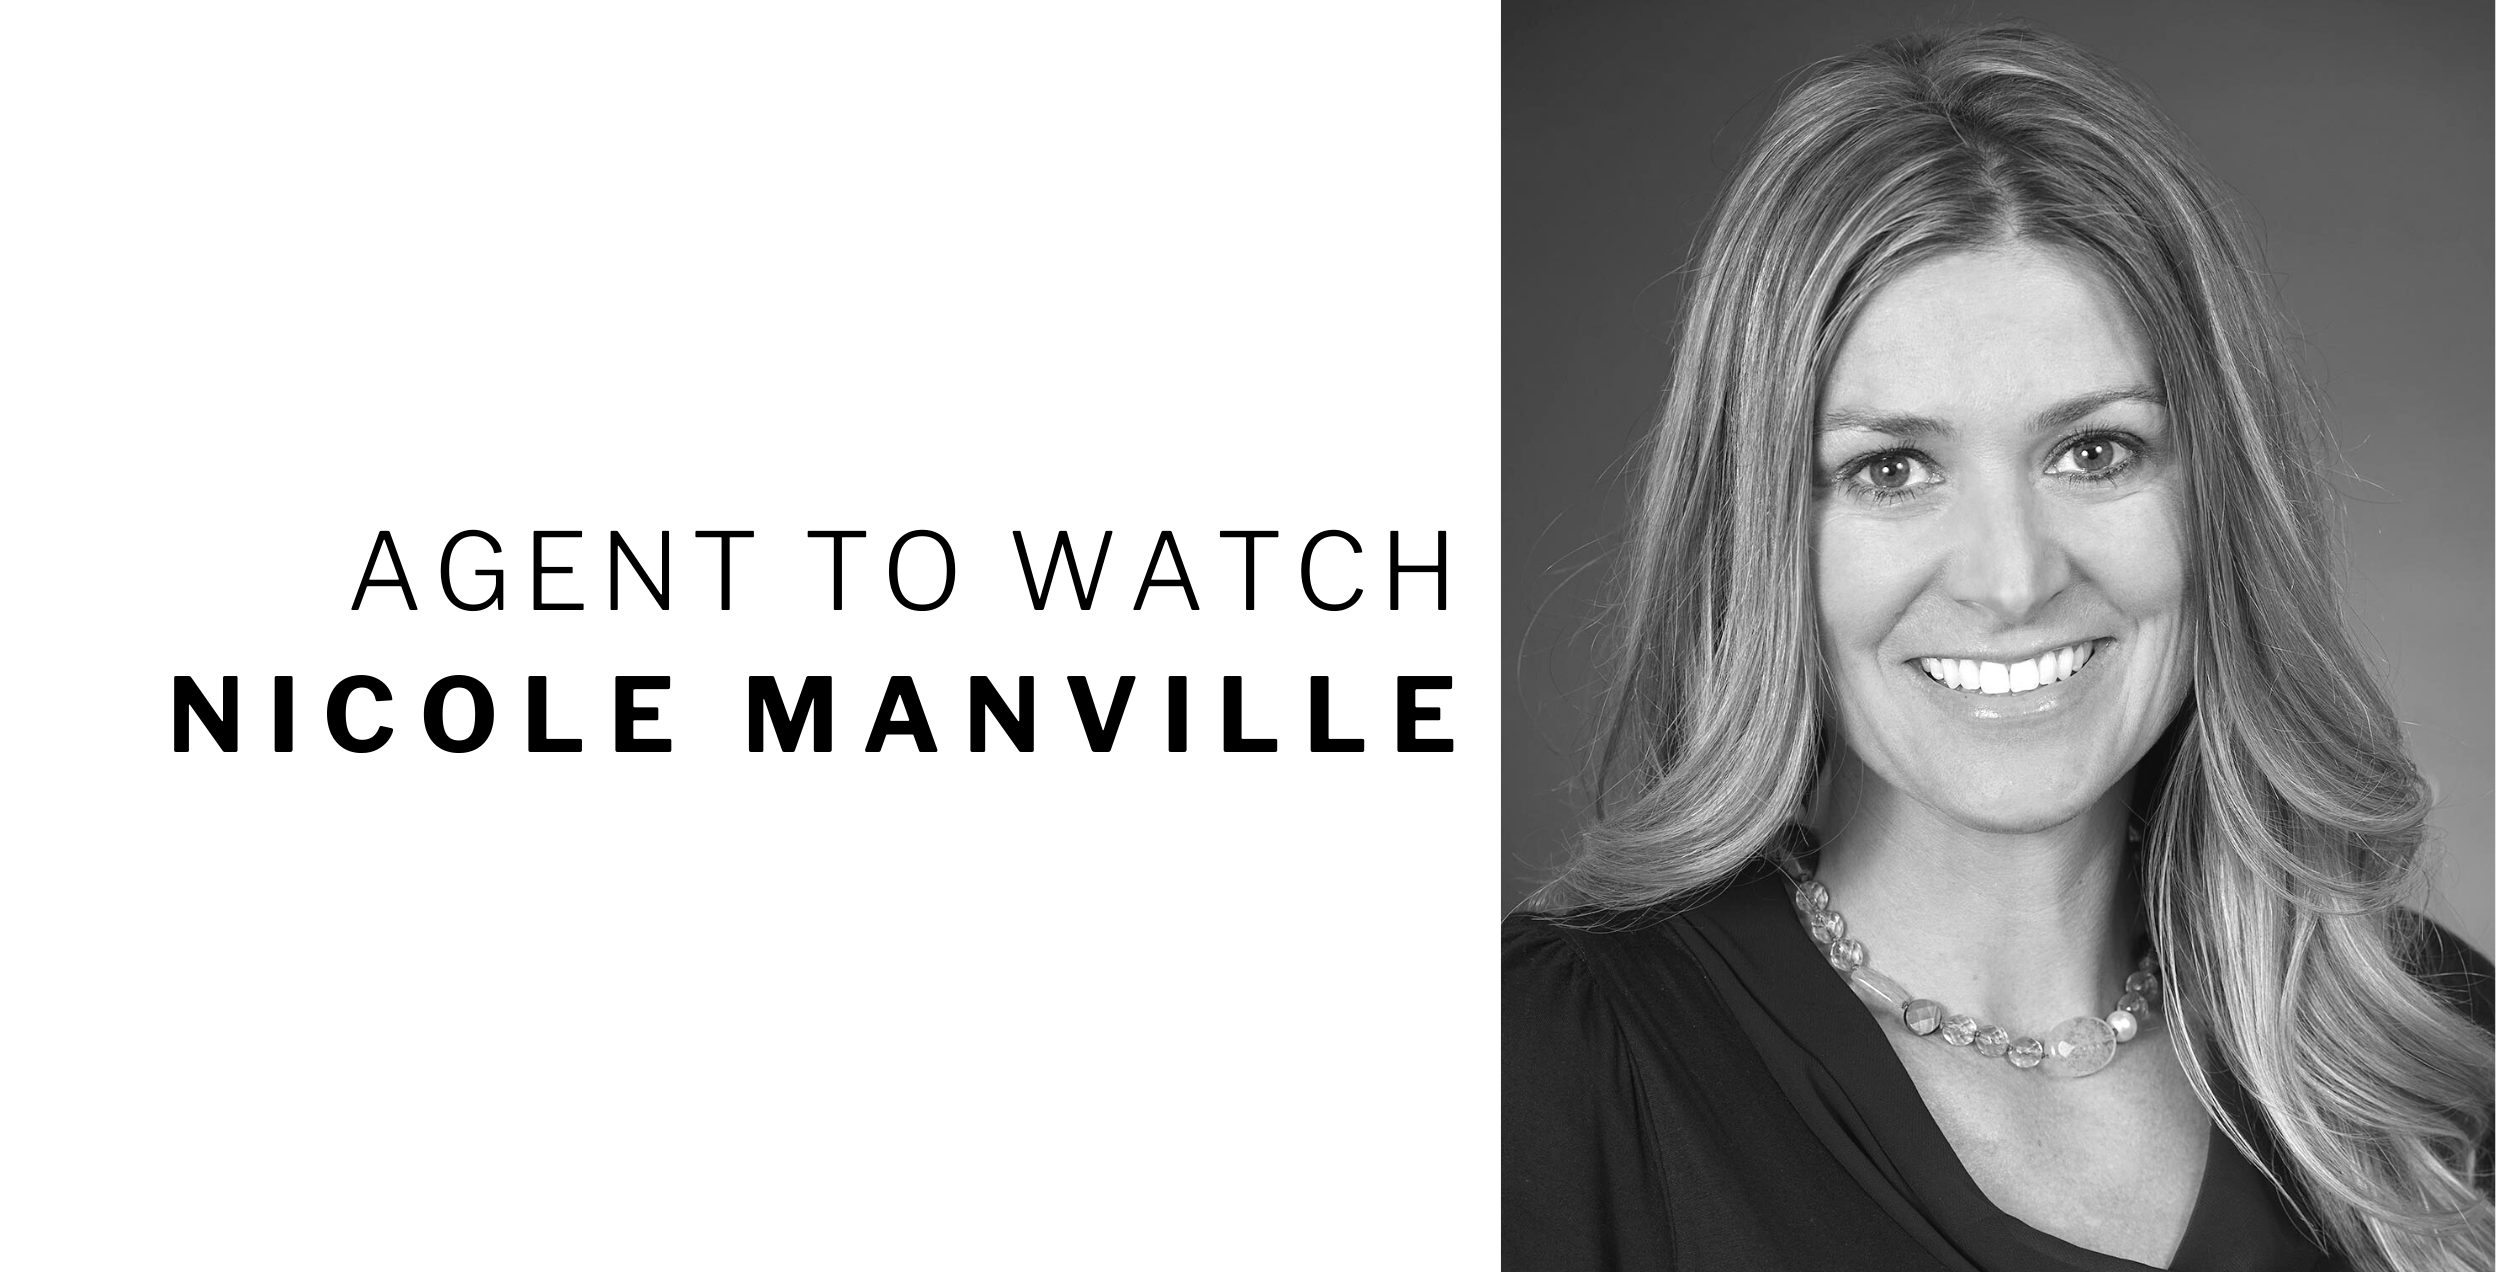 Agent to Watch Nicole Manville